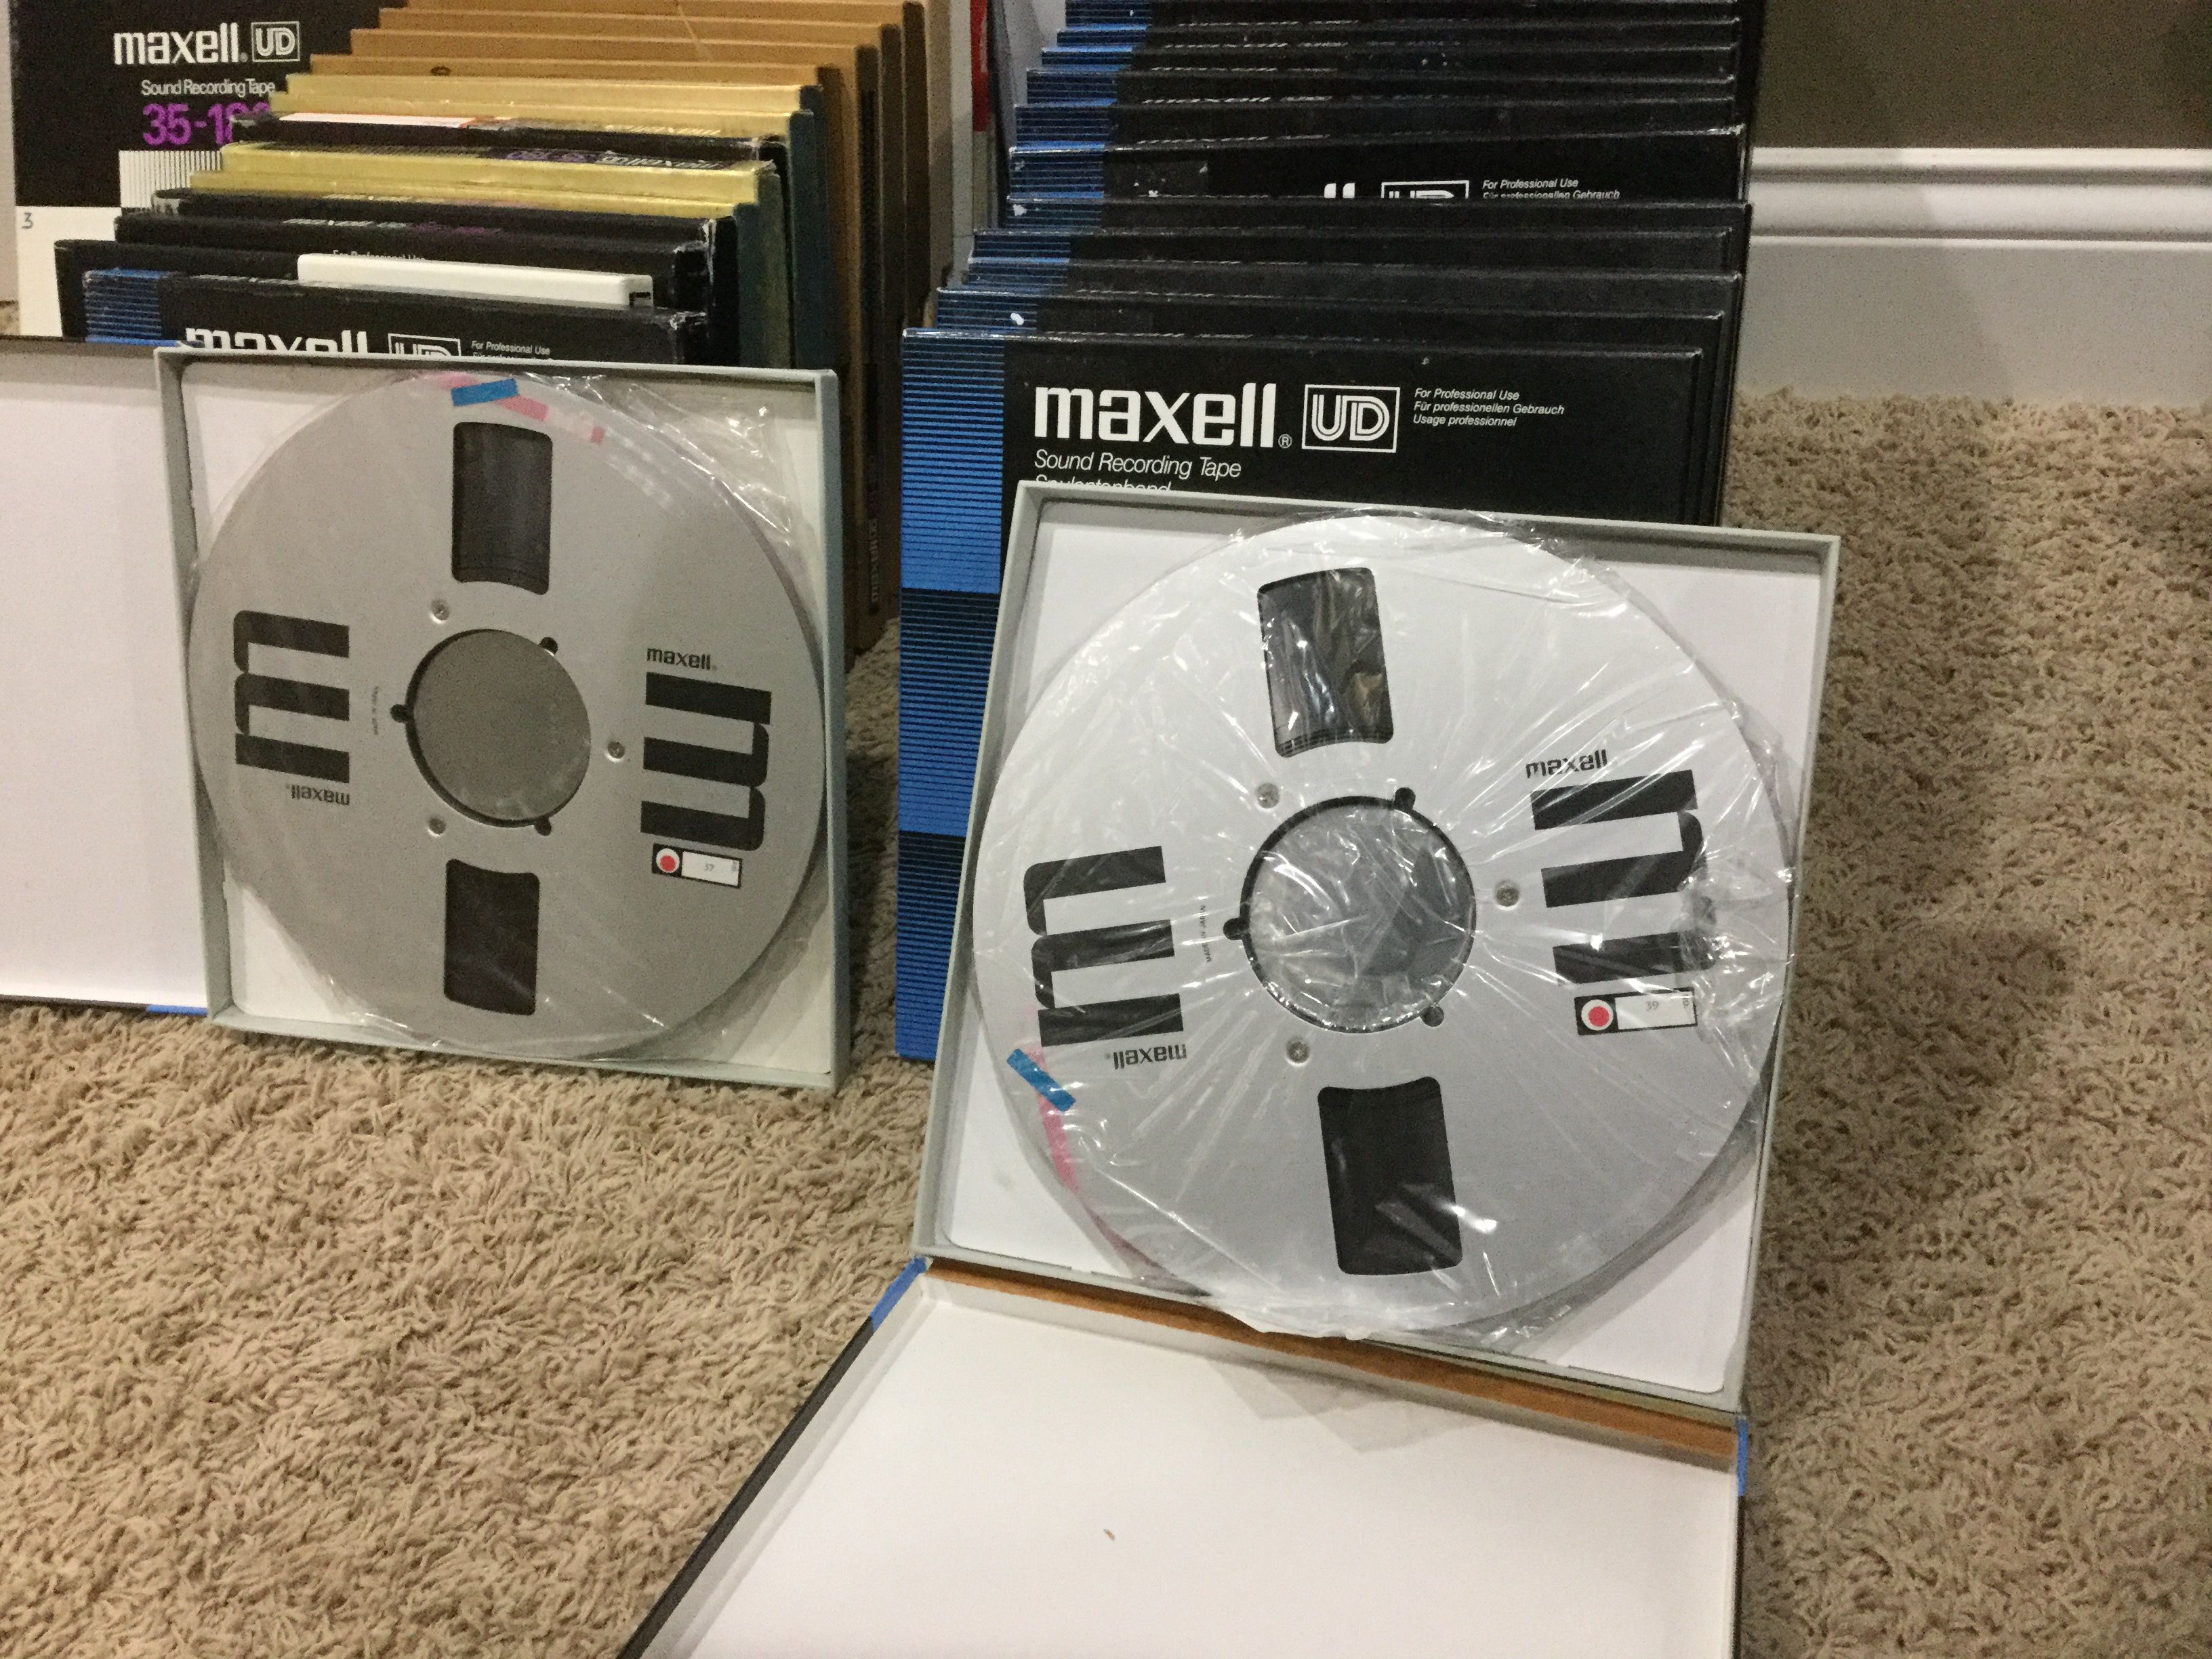 FS:Maxell ud-35-180 10.5 reel to reel tape Sold - Garage Sale